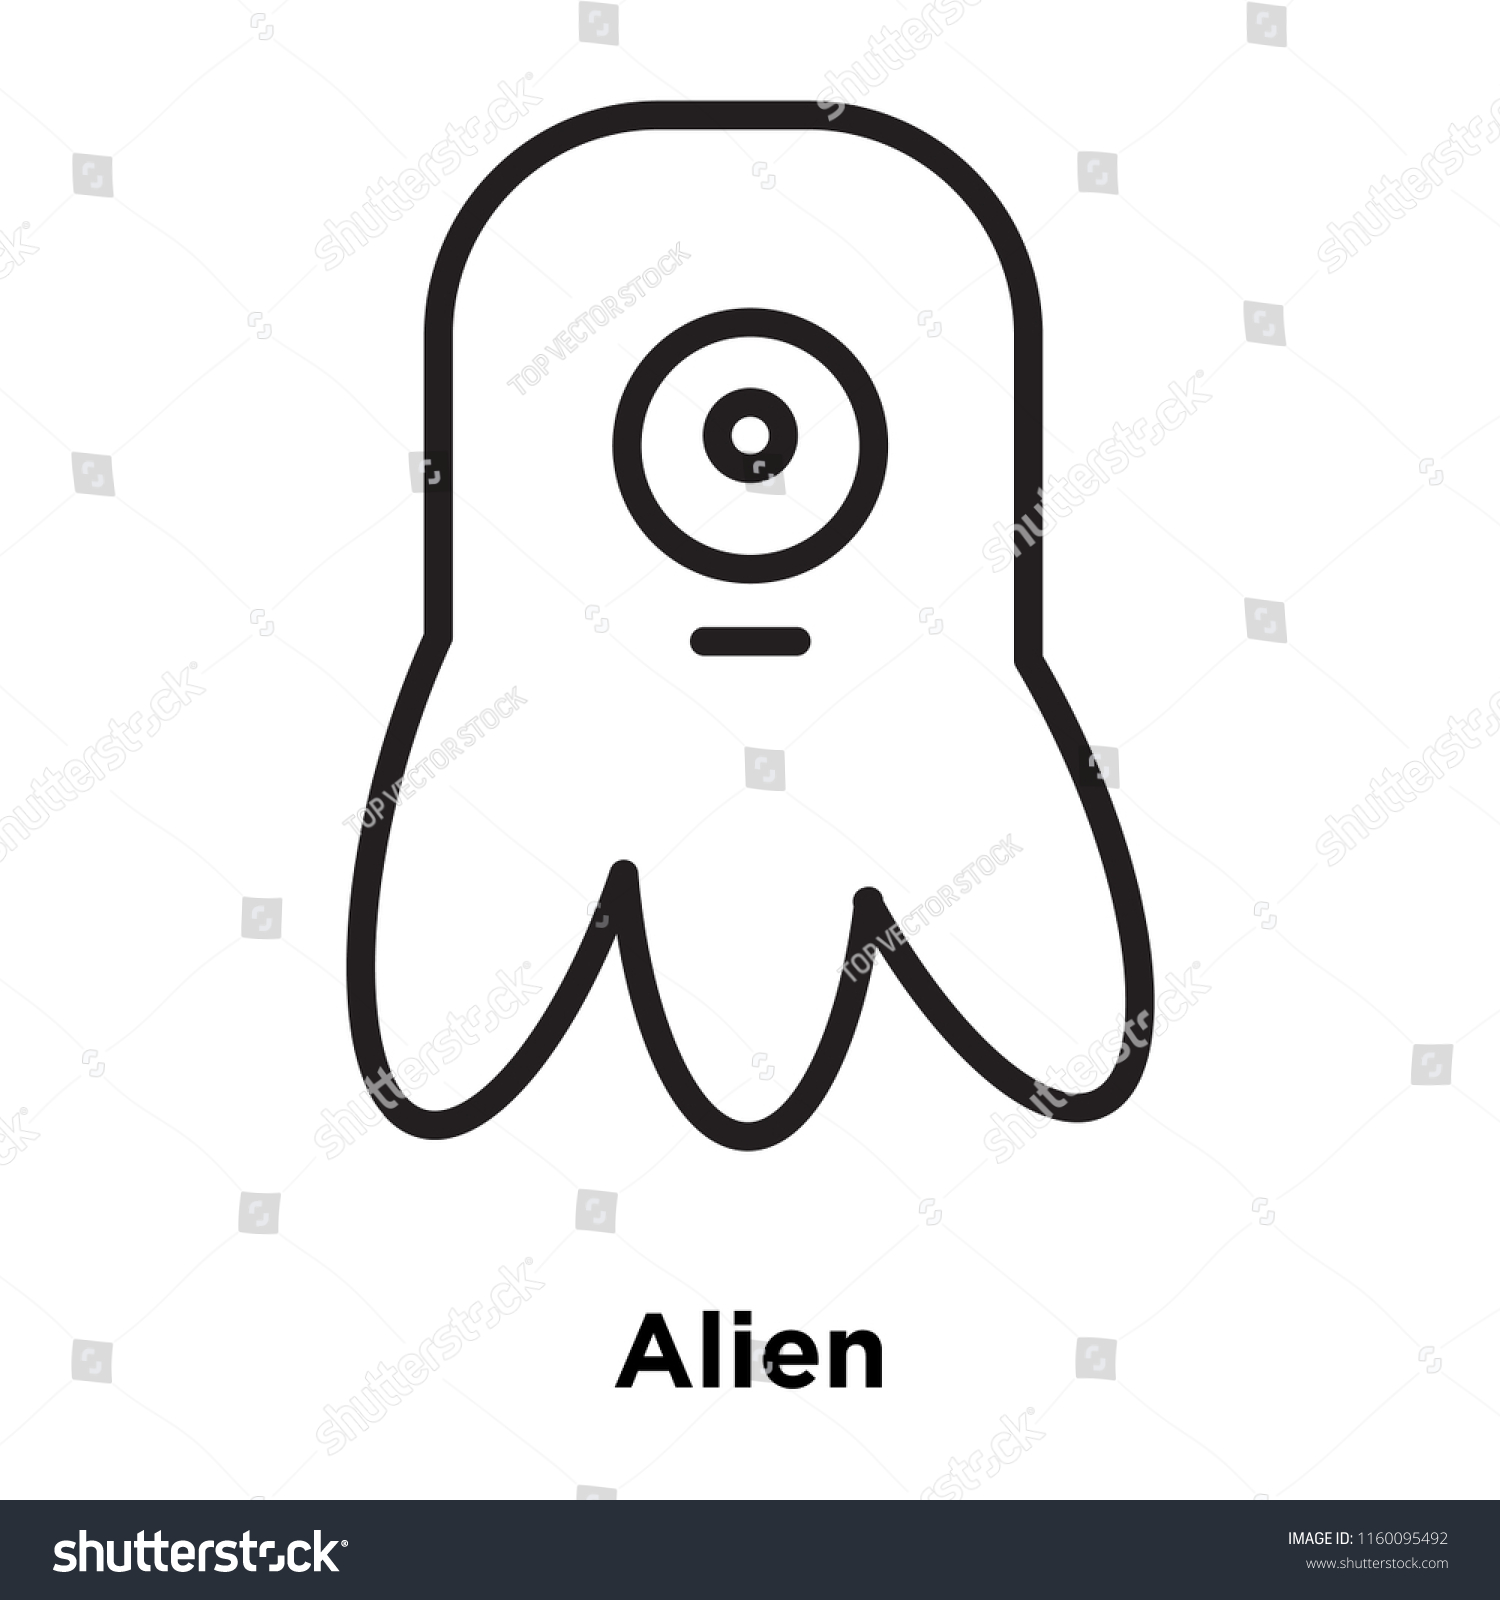 SVG of Alien icon vector isolated on white background, Alien transparent sign svg